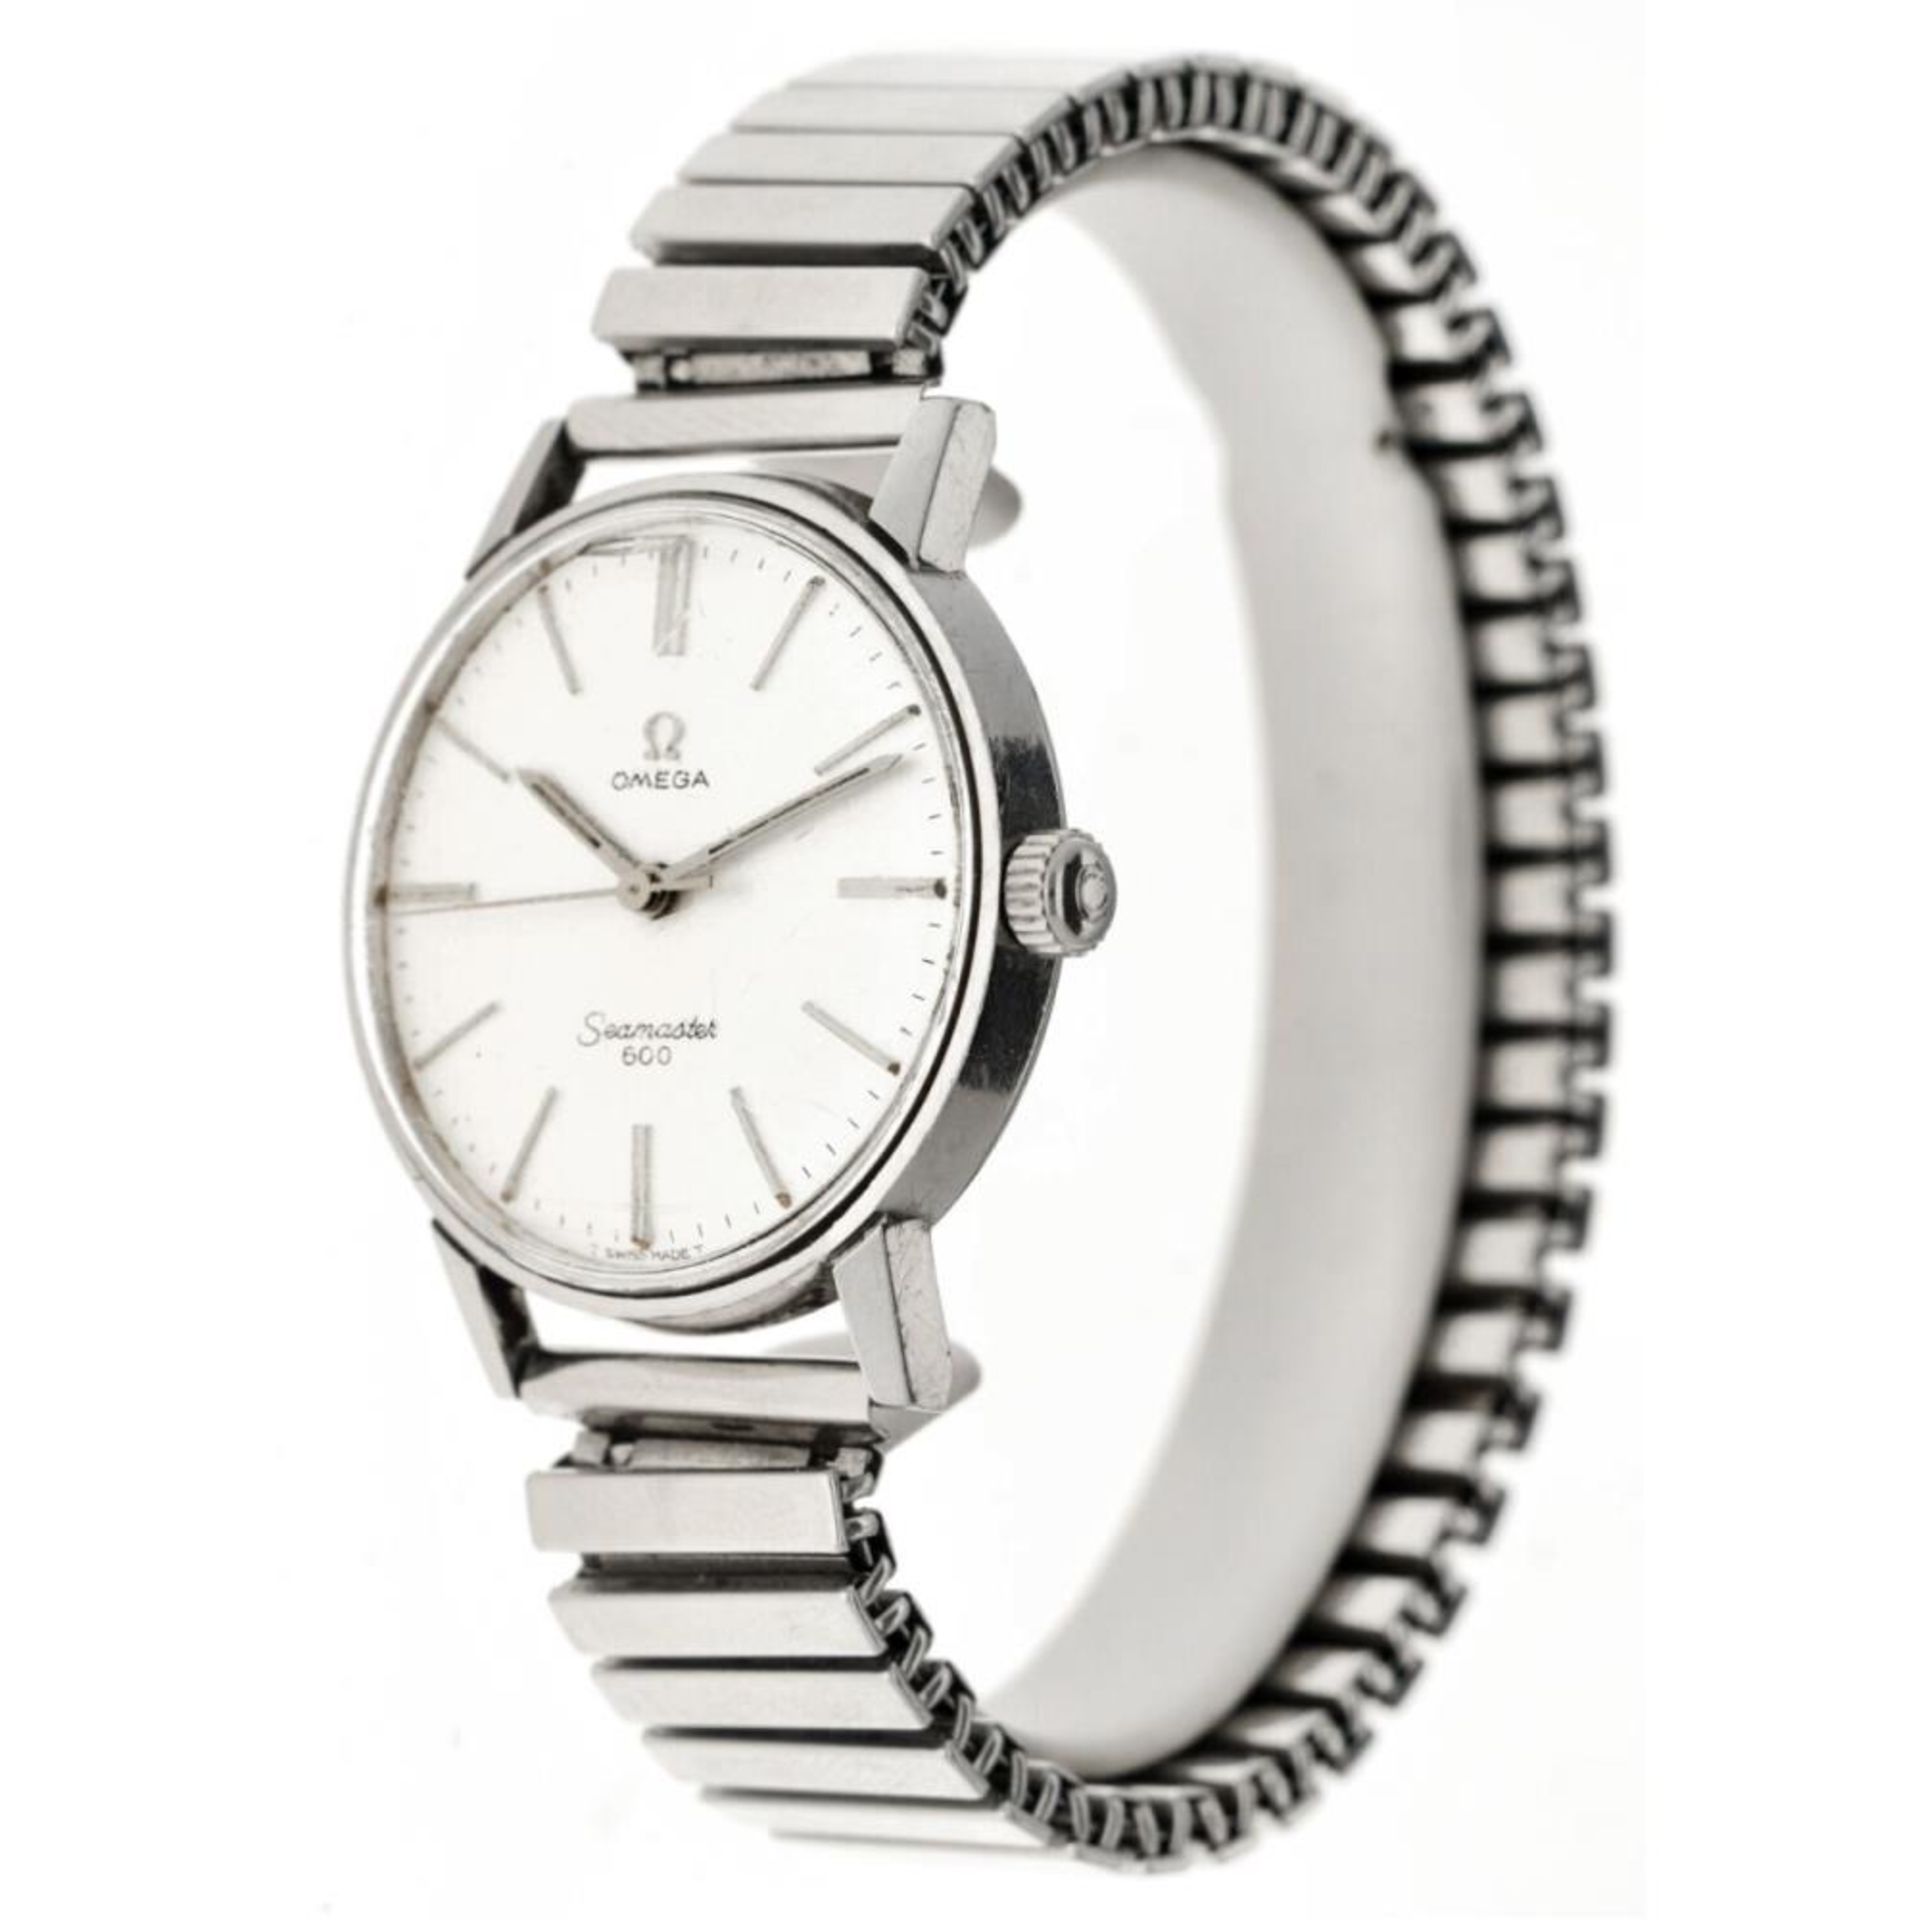 Omega Seamaster 600 135.011 - Men's watch - approx. 1964. - Image 2 of 4